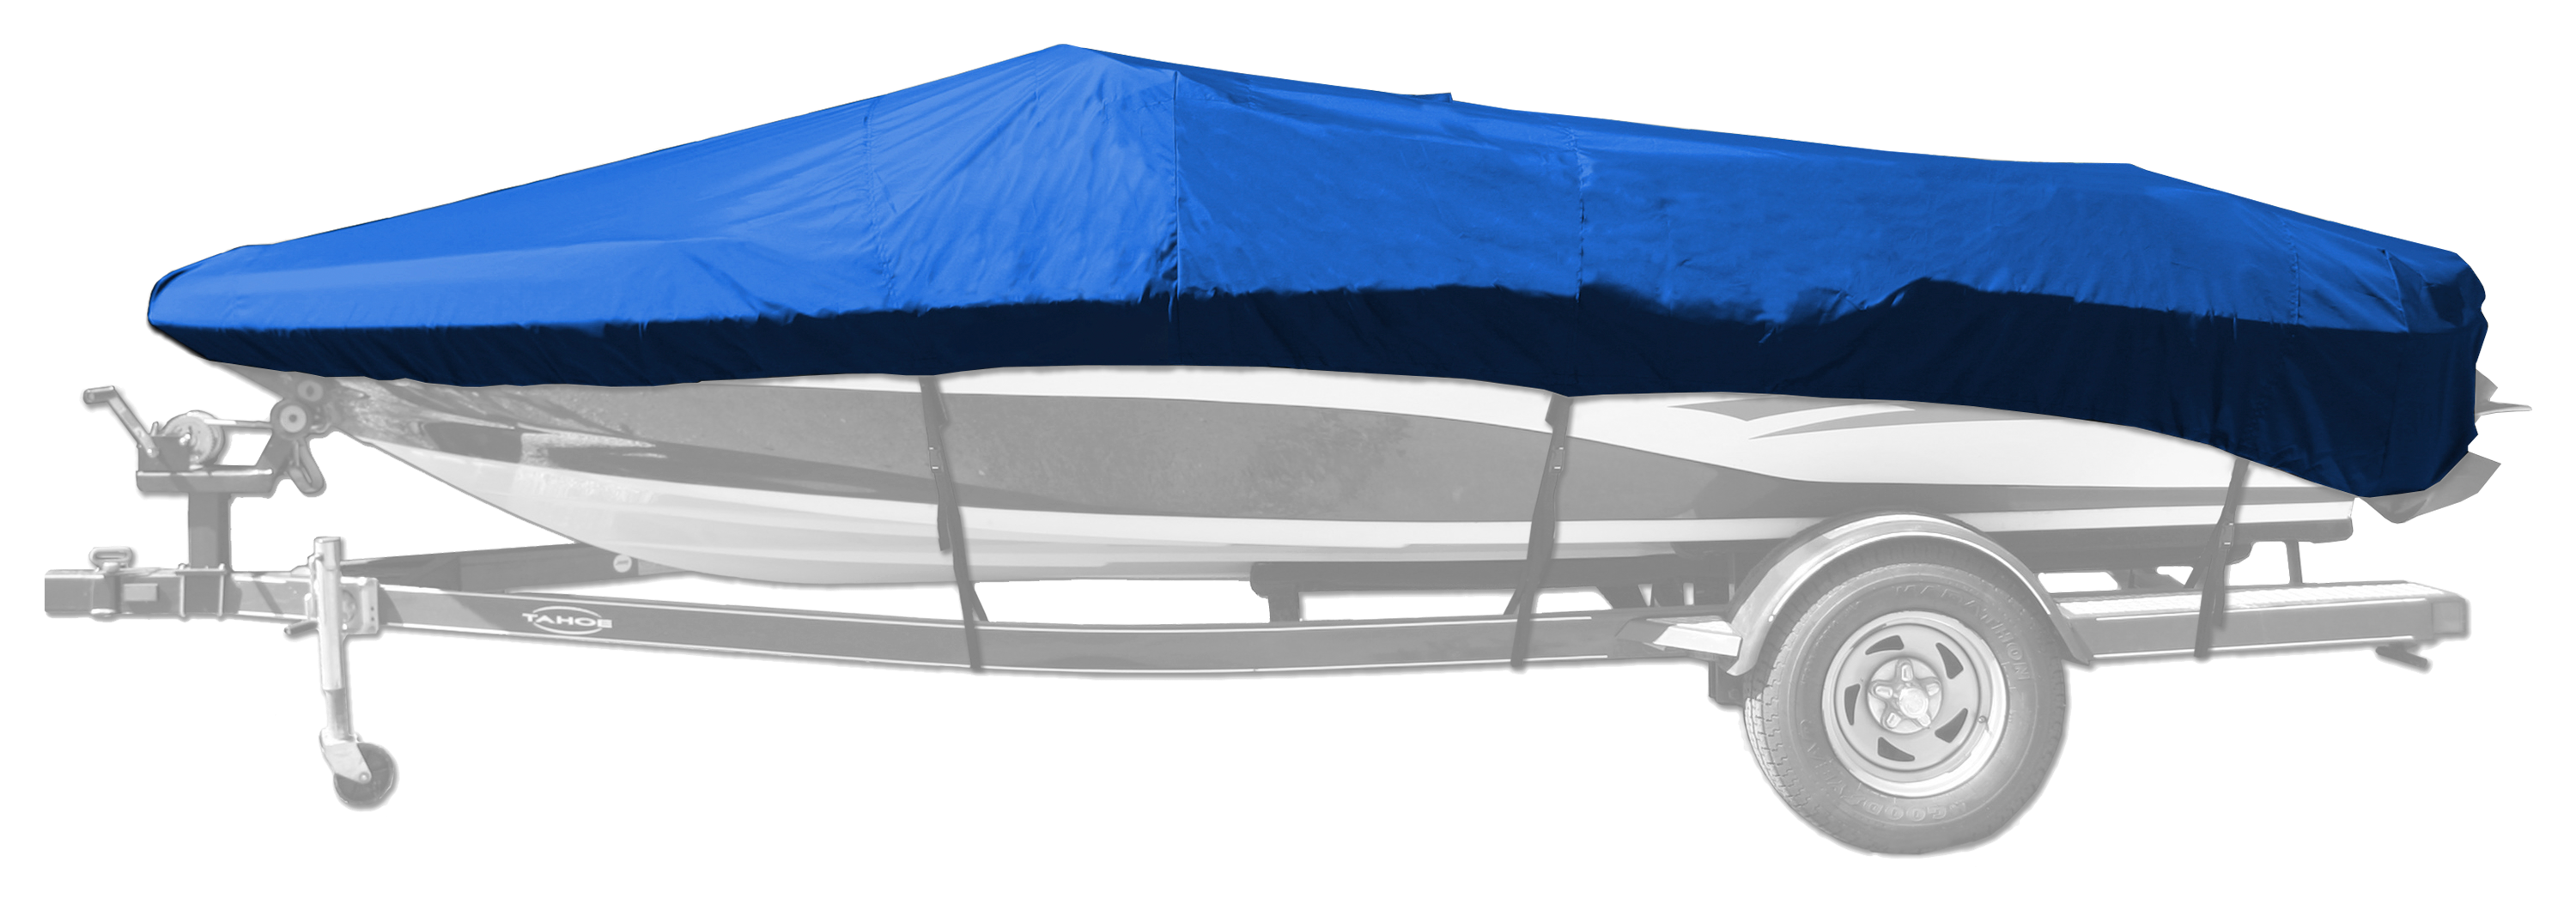 Bass Pro Shops Select Fit Hurricane Boat Cover for Euro V-Hull Runabout I/O Model by Westland - Blue - 16'6'' to 17'5